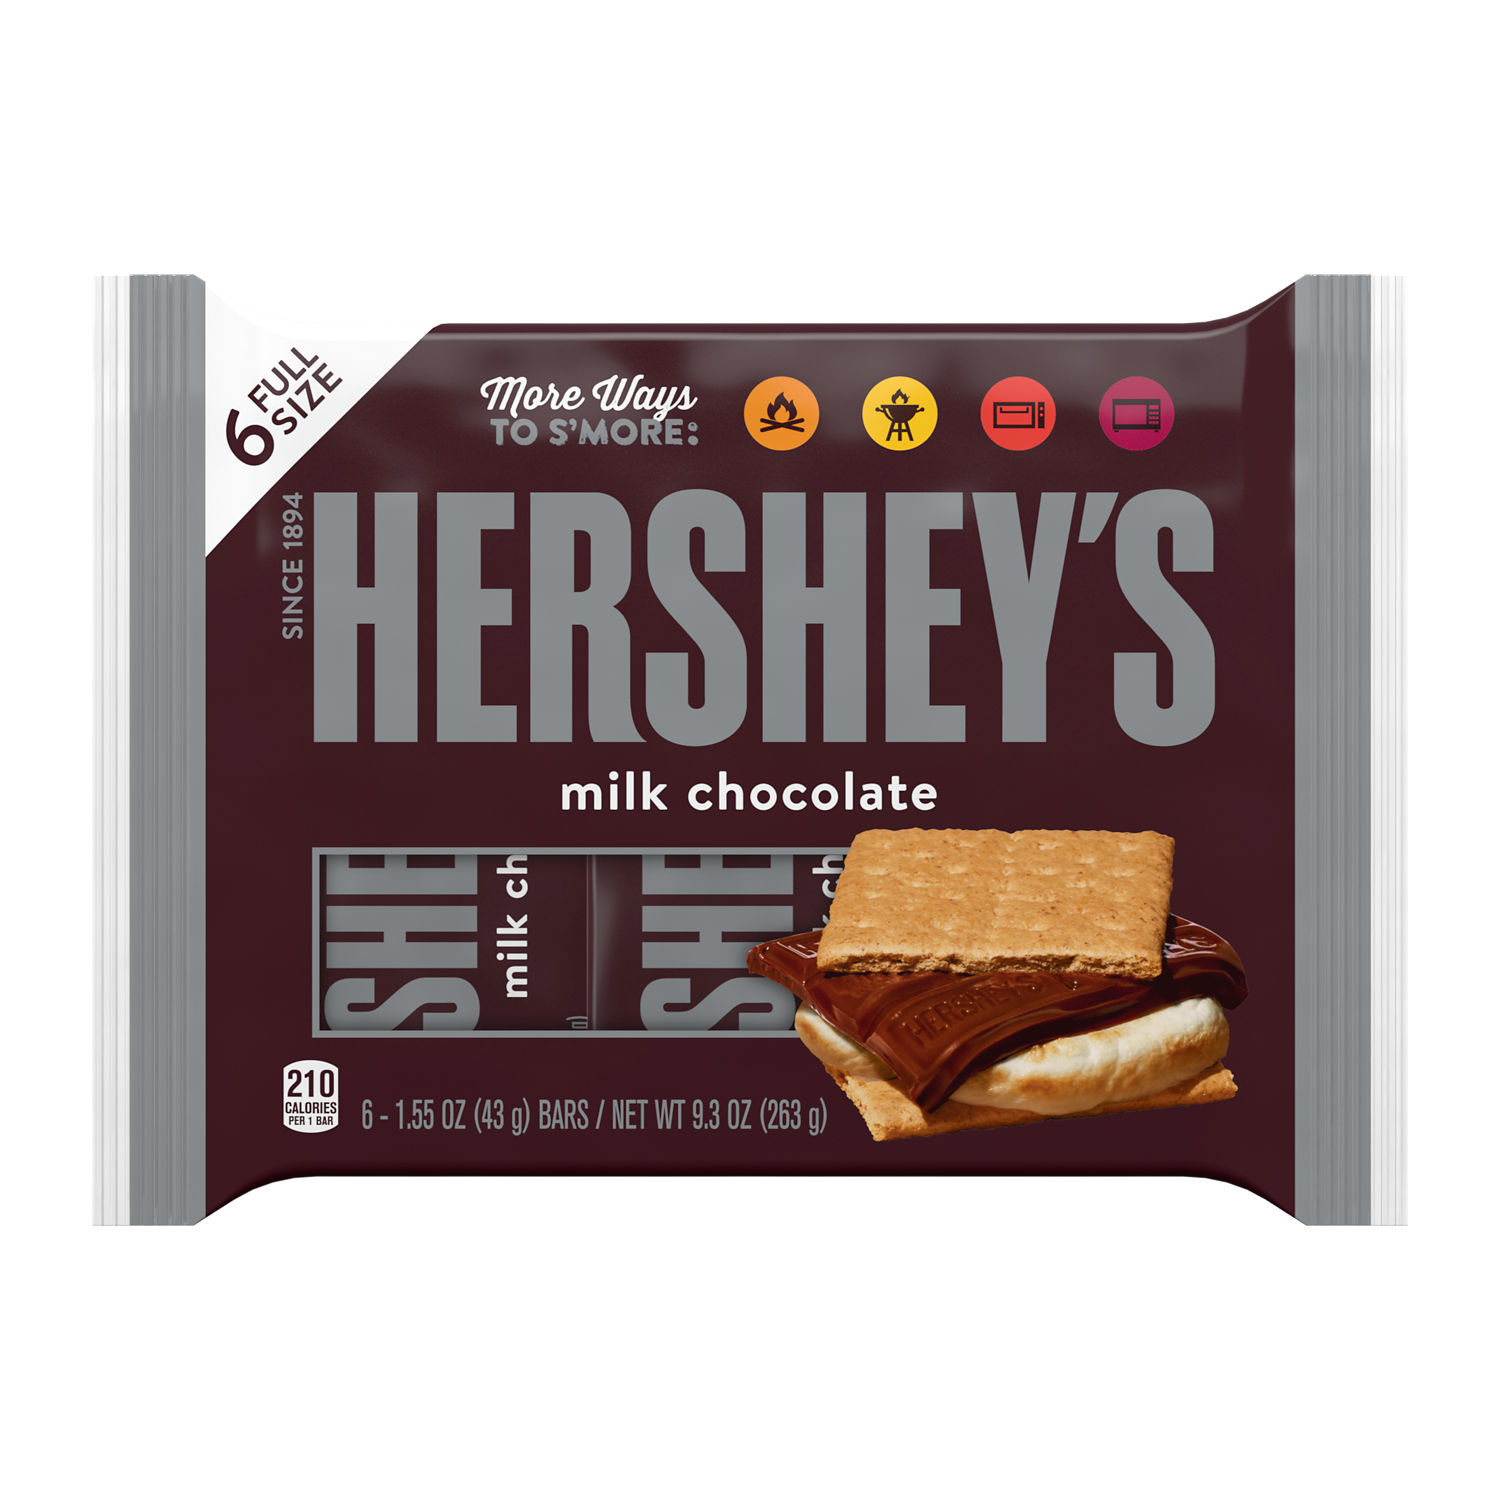 Hershey's Milk Chocolate Candy, Bars 1.55 oz, 6 Count - image 2 of 9